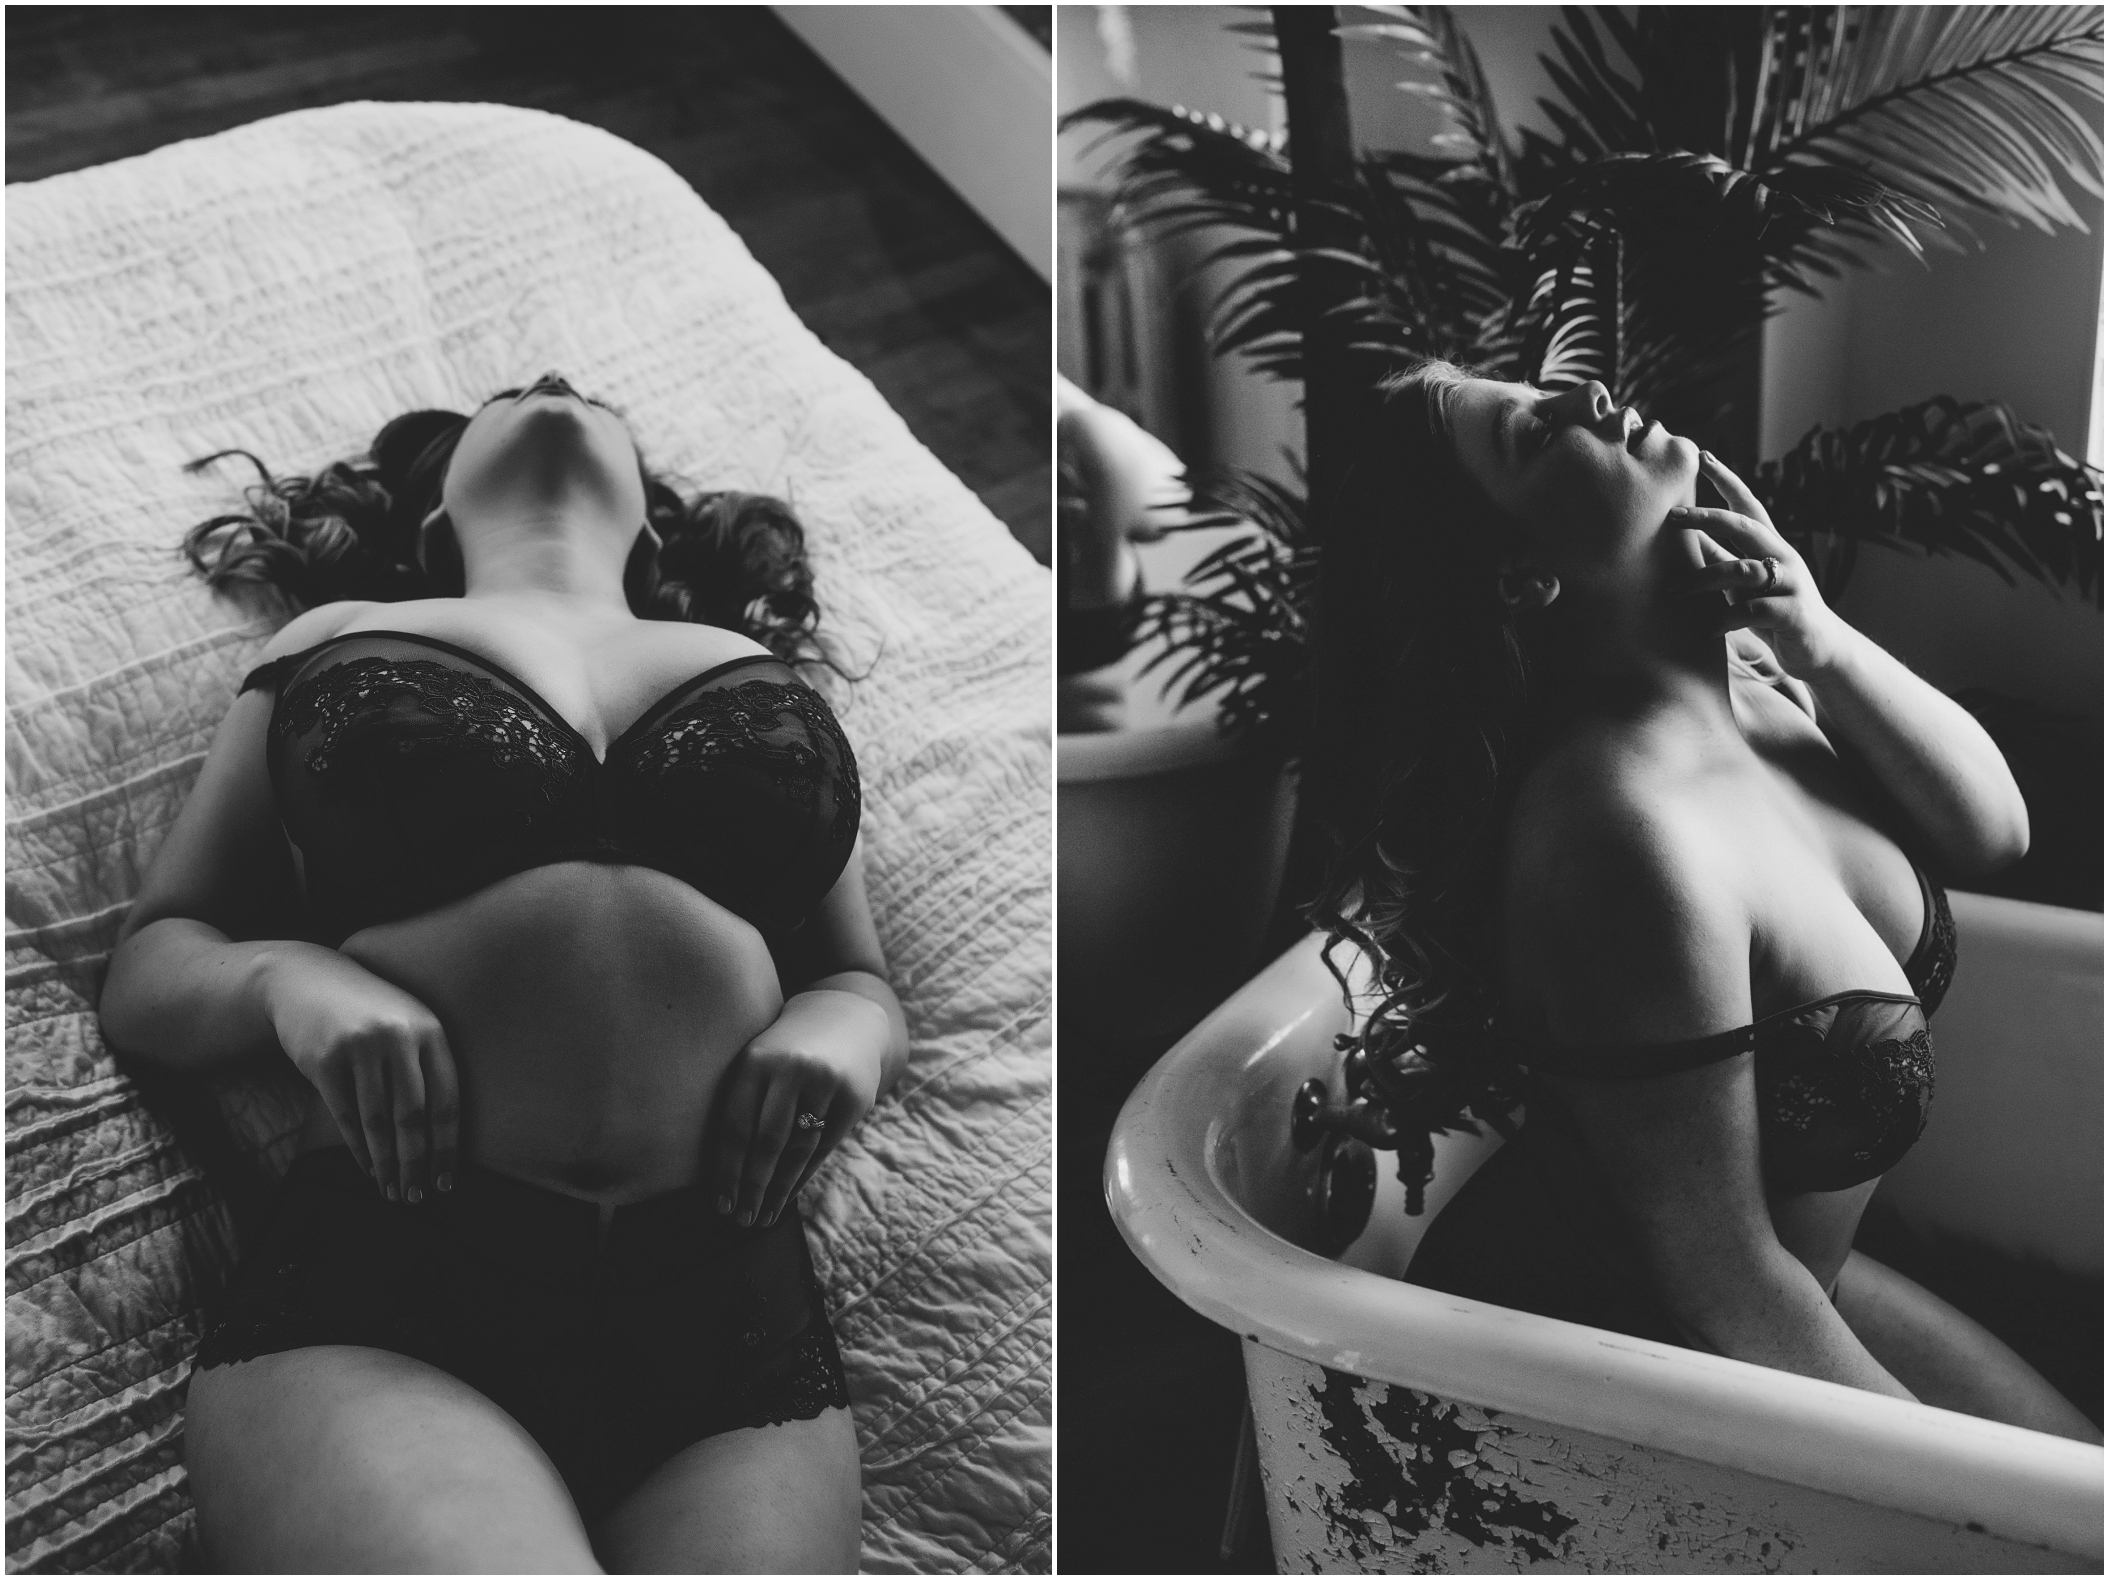 Boudoir photography in bathtub and bed in lingerie